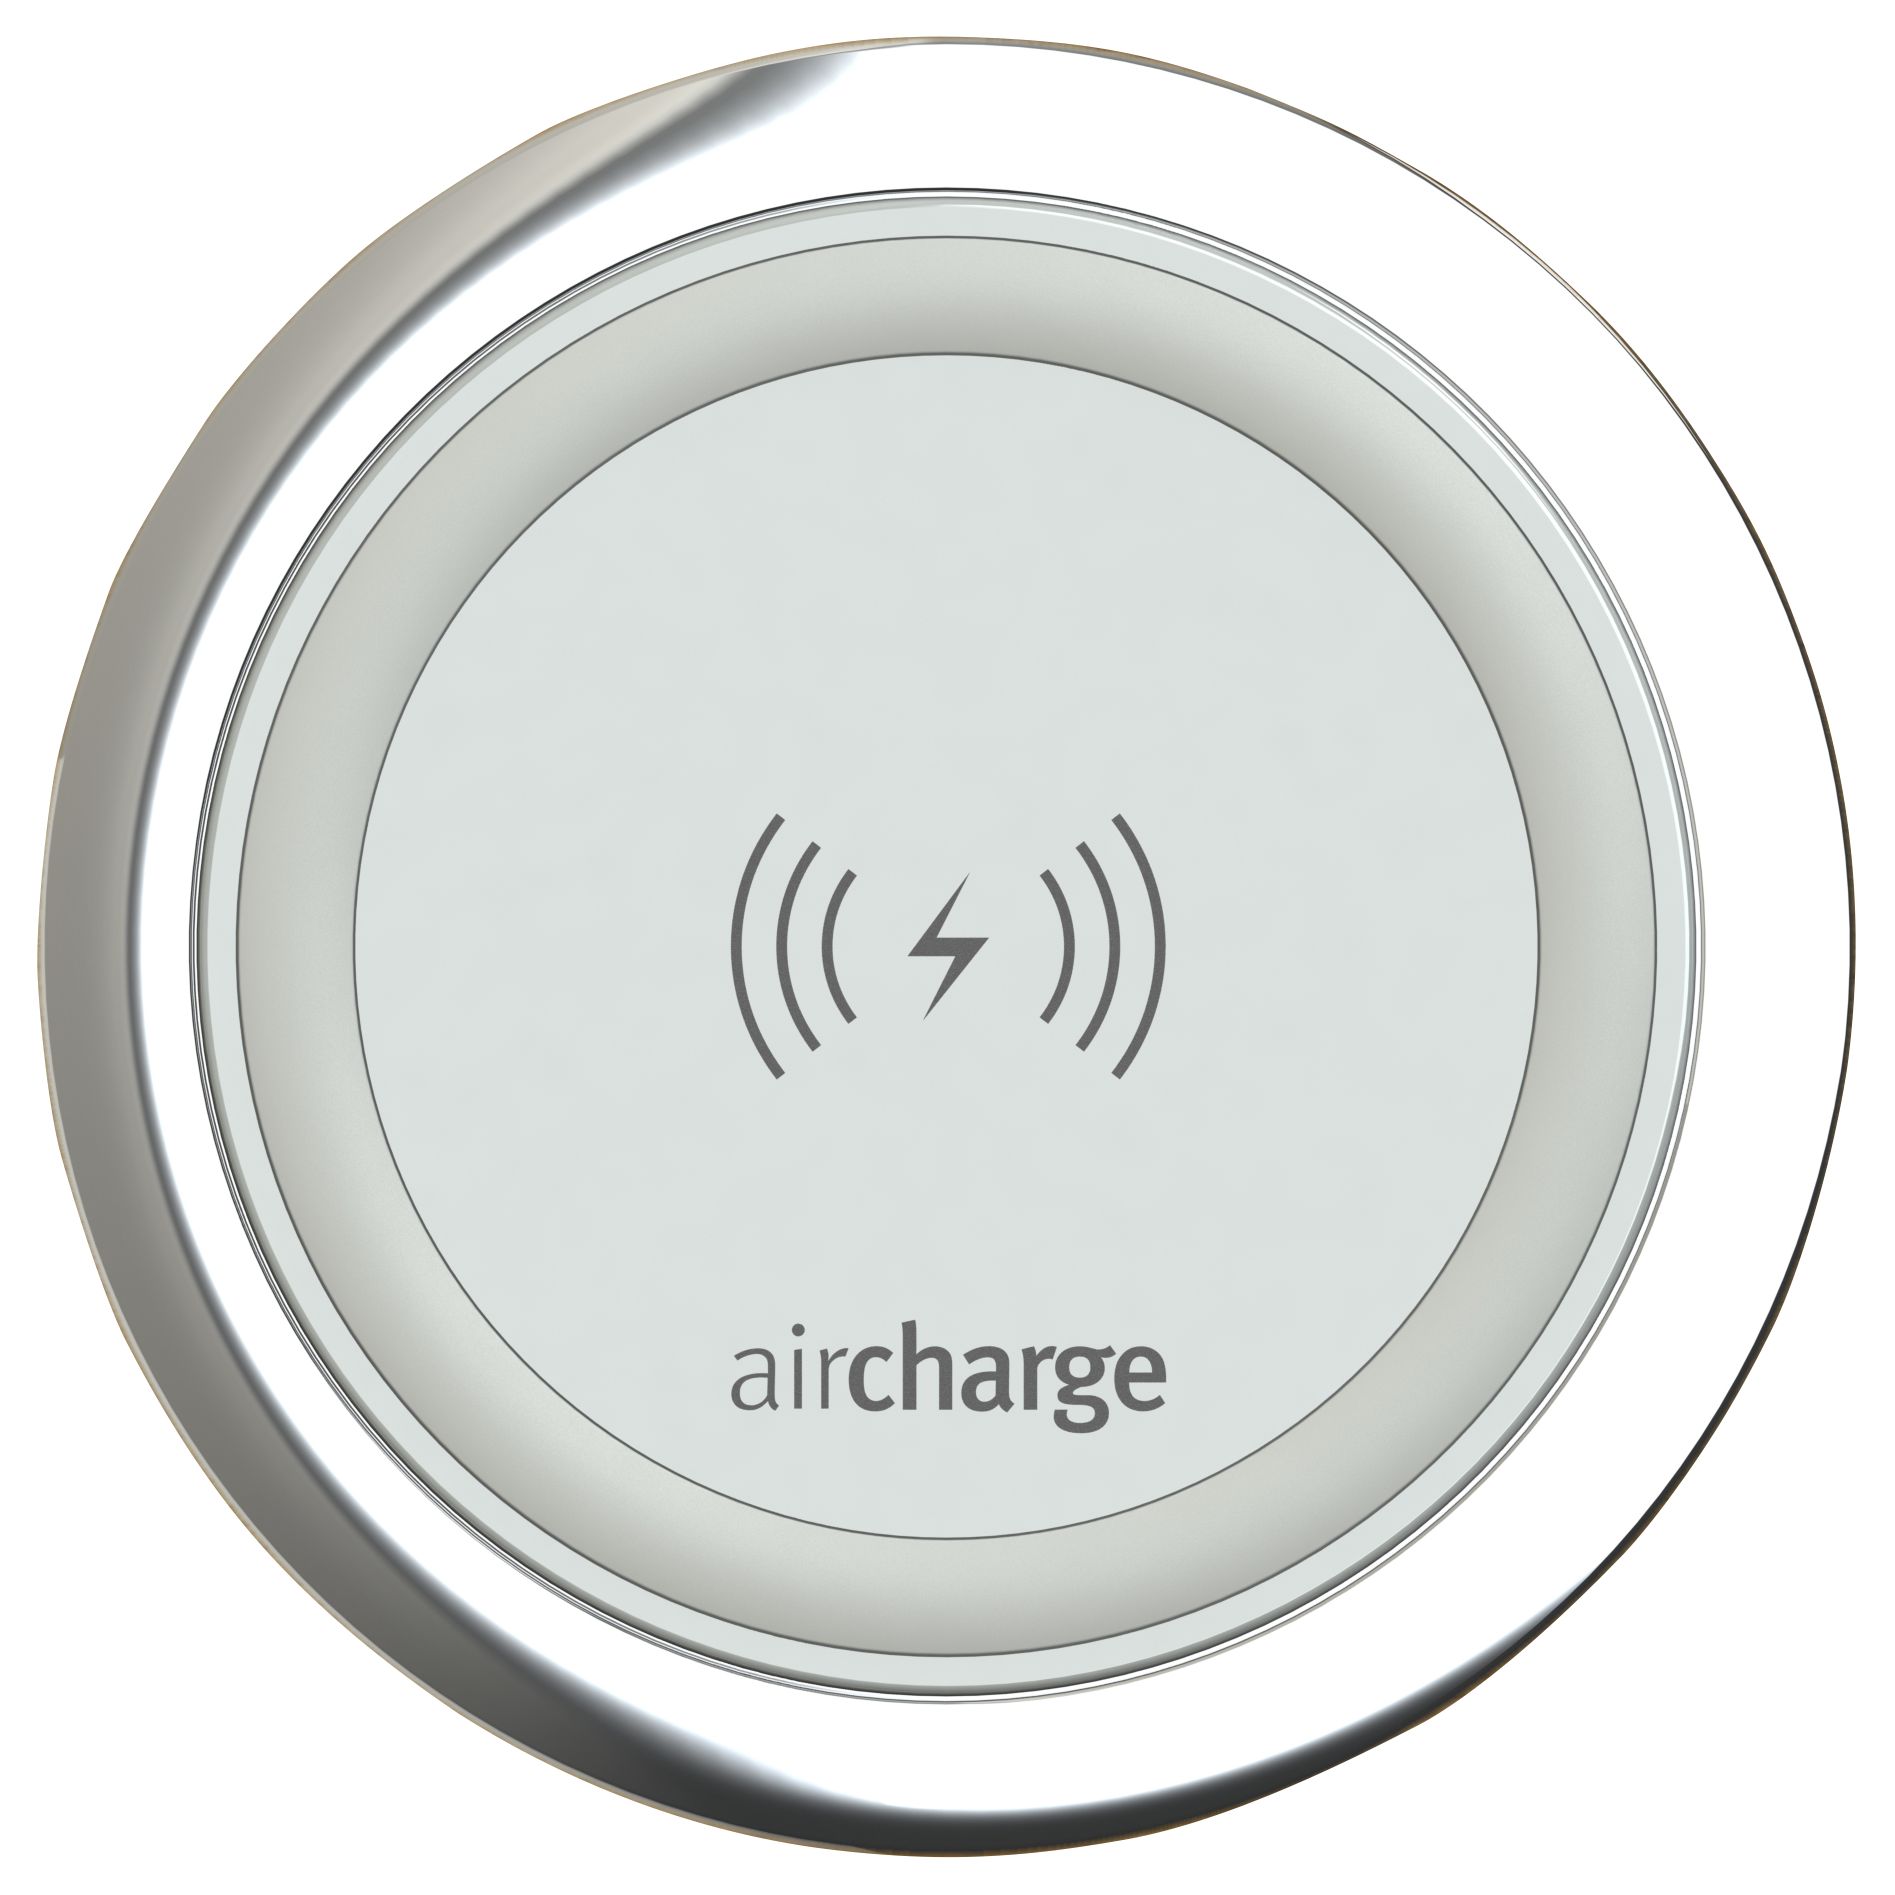 Aircharge AIR0035 Qi Wireless Charger and USB Plug Kit, White